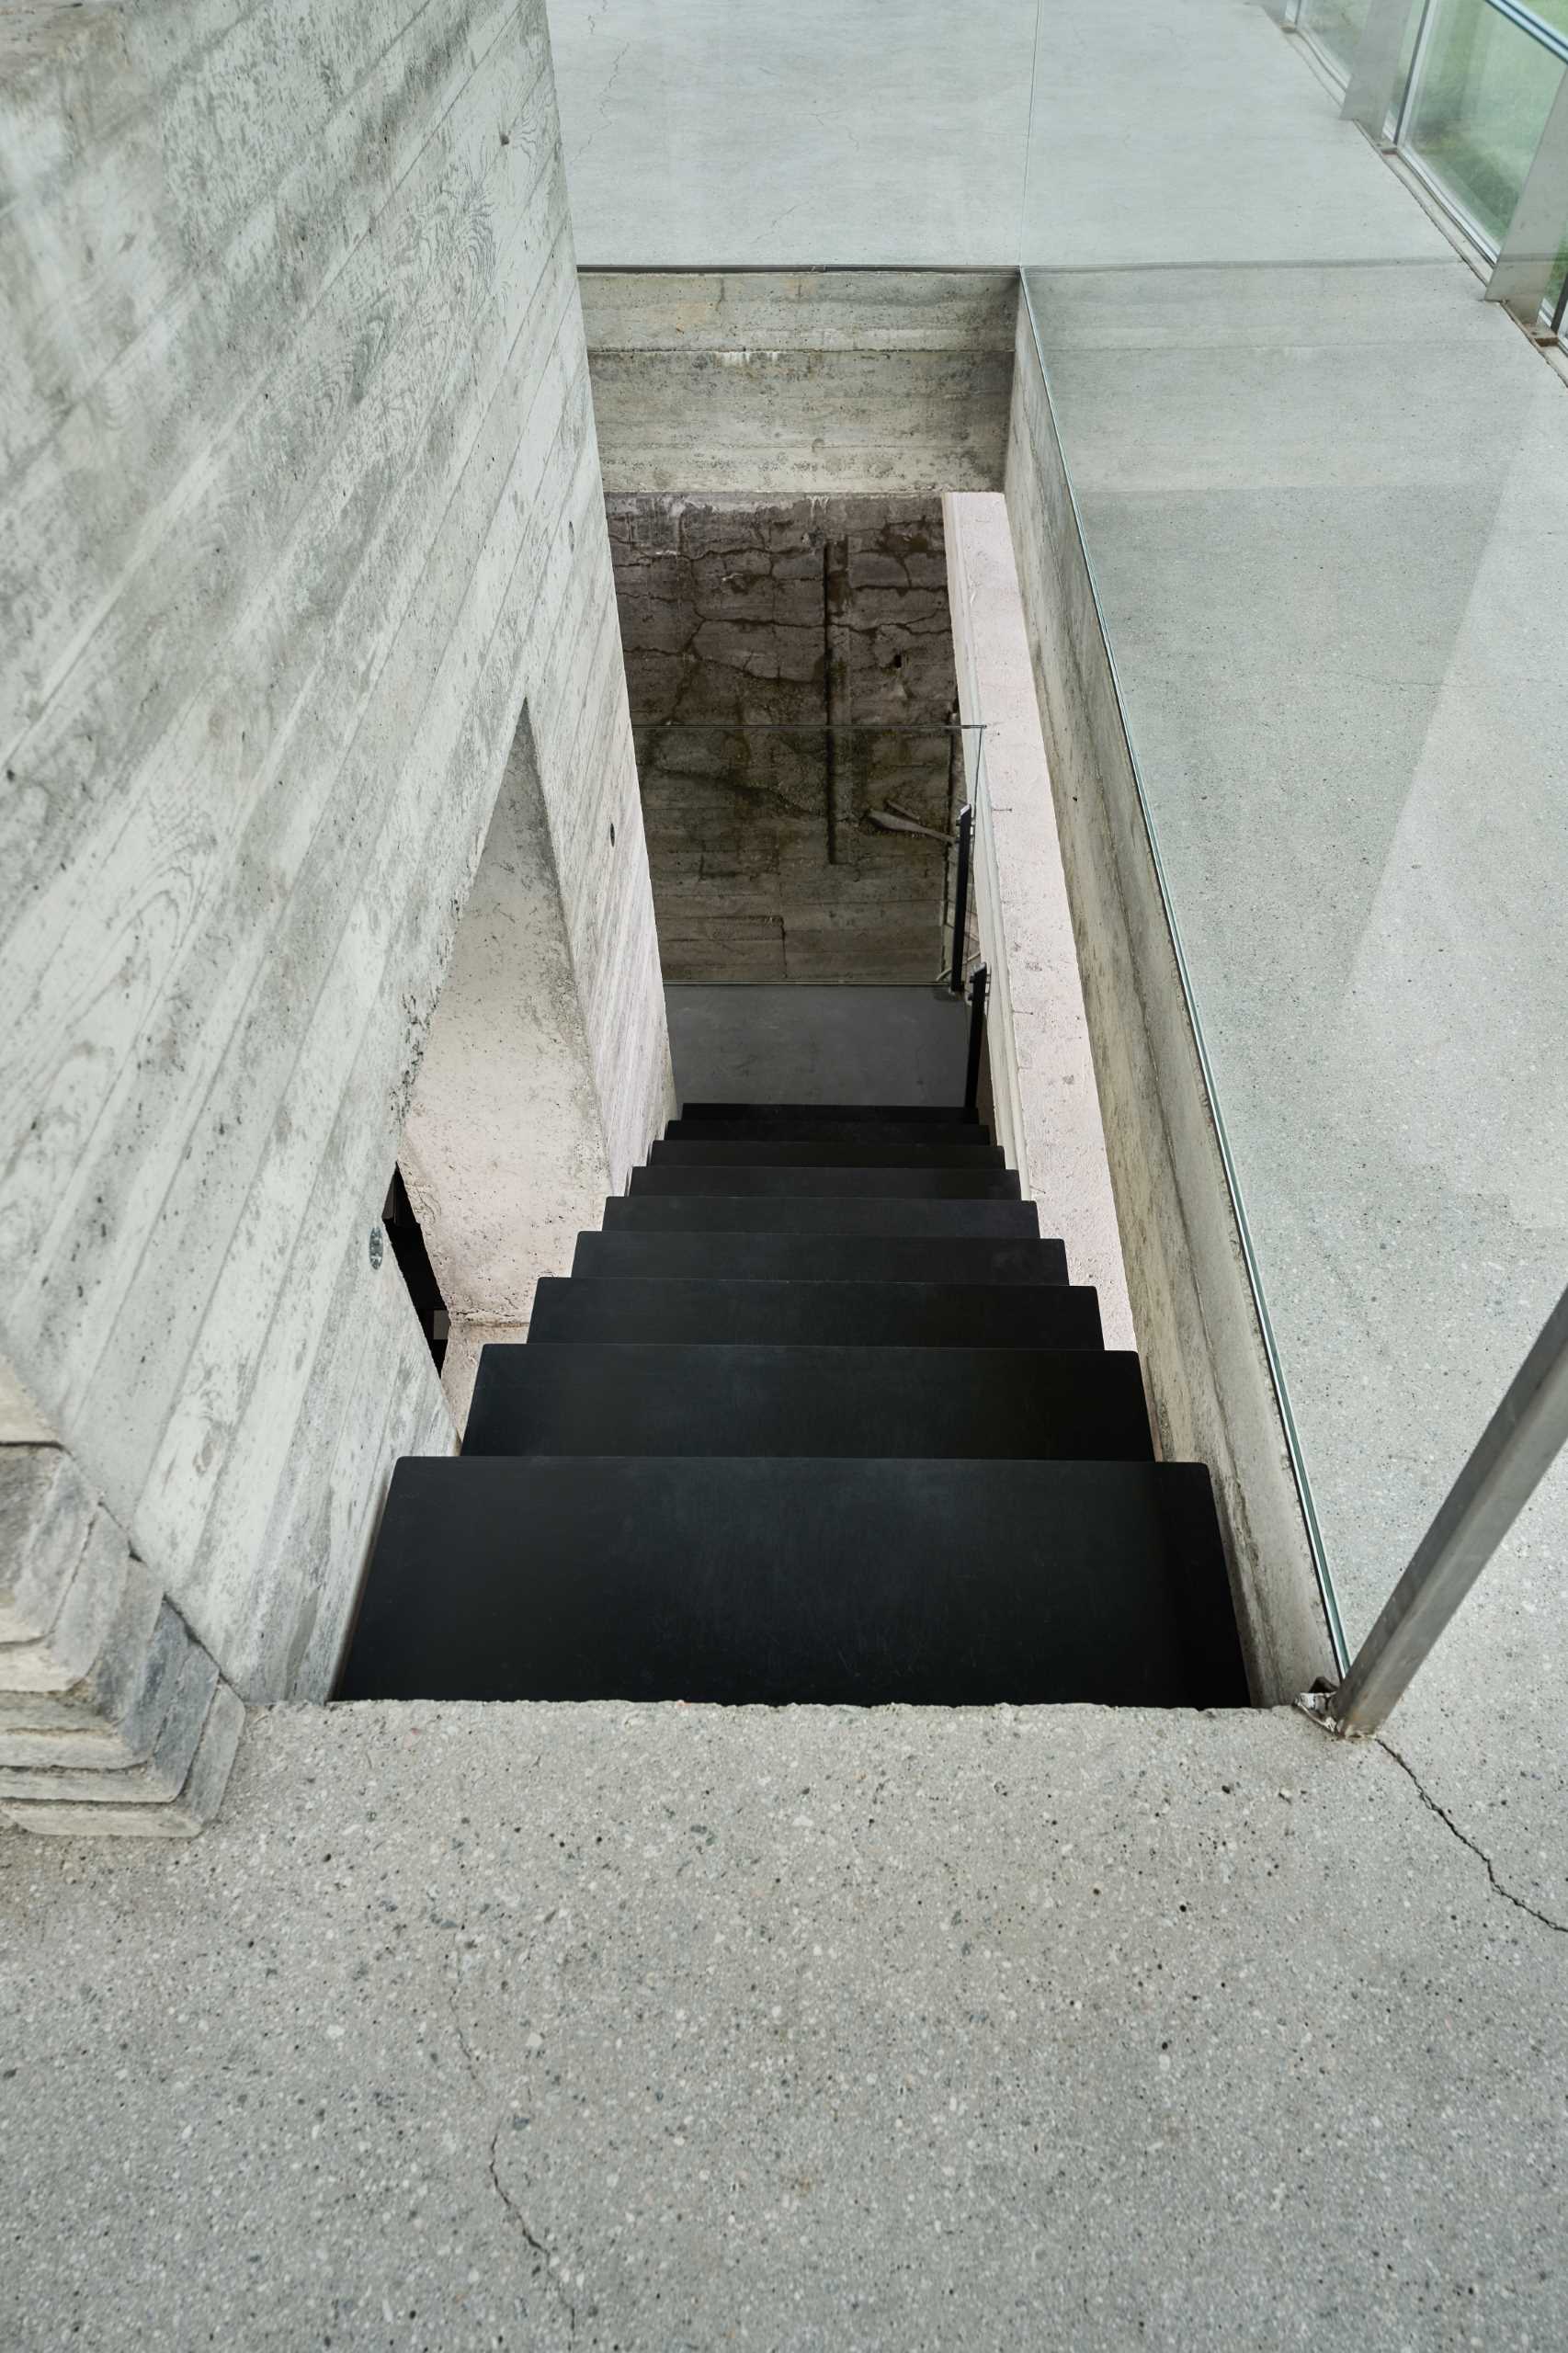 Black metal stairs contrast the concrete walls and glass railings.